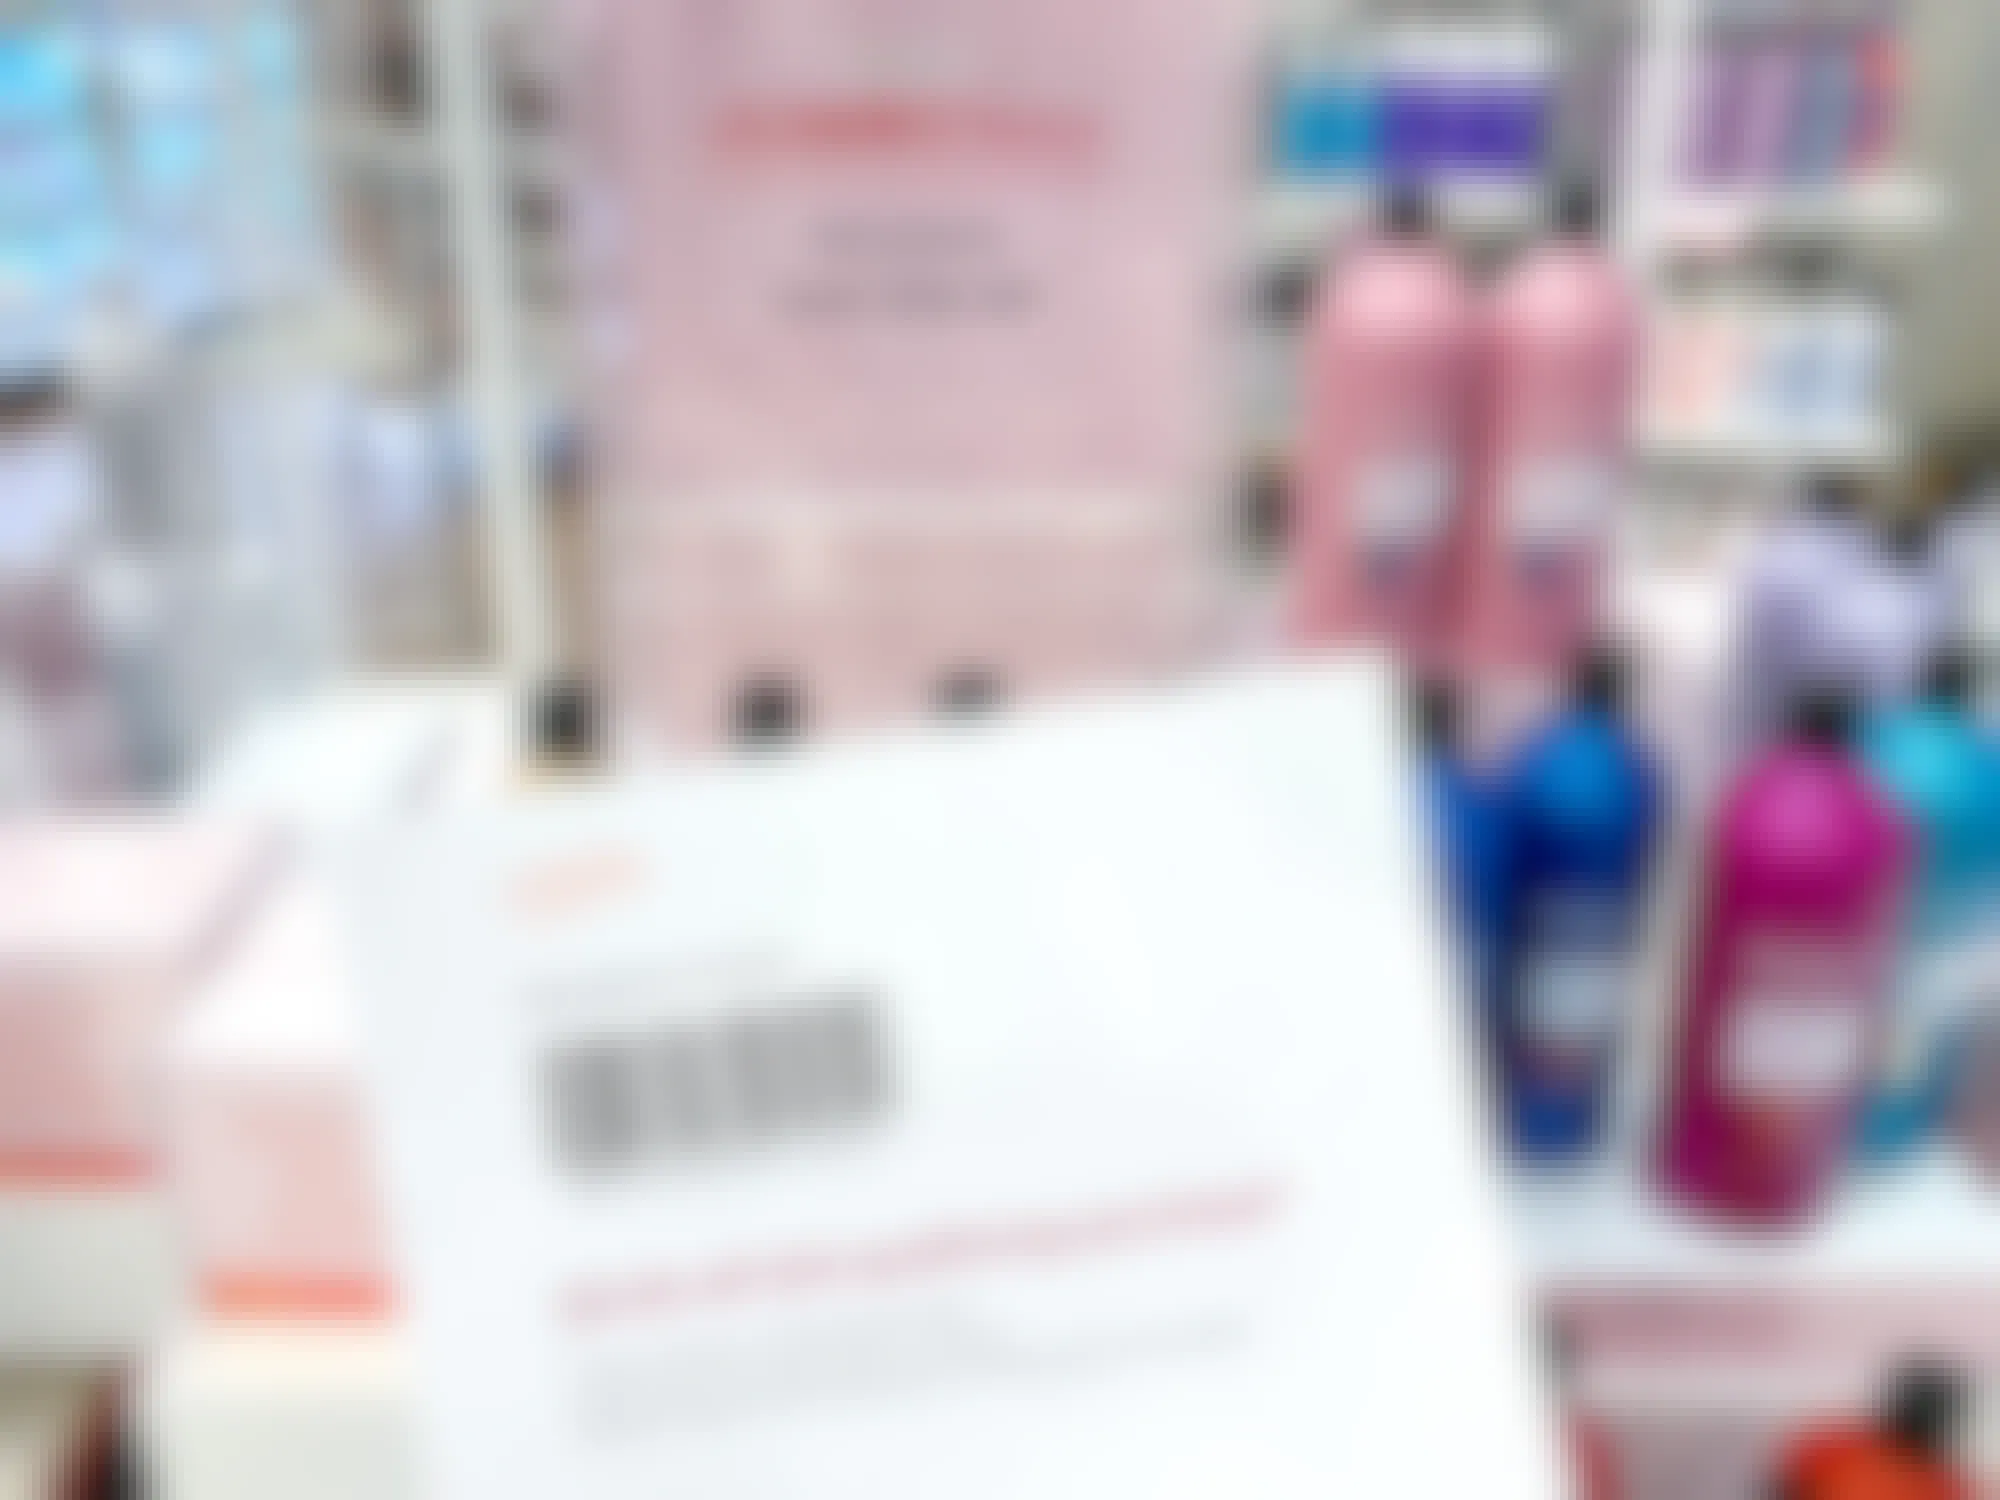 printed ulta coupon near jumbo love event signage and products 